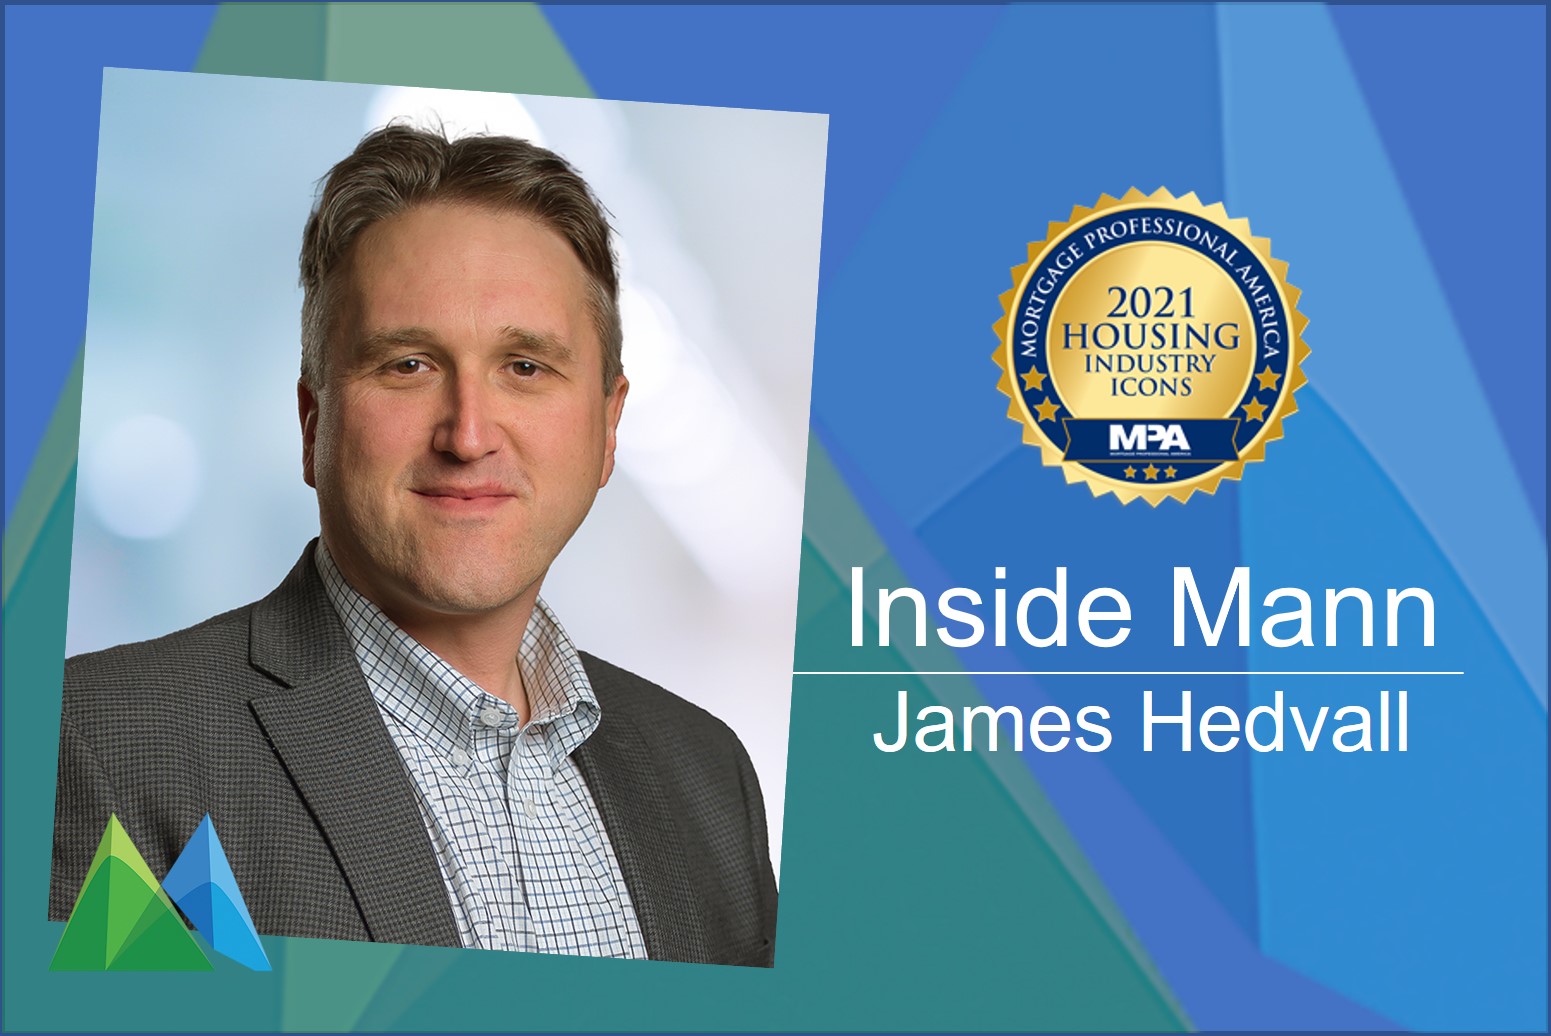 Mann Mortgage’s James Hedvall named a 2021 Housing Industry Icon by MPA